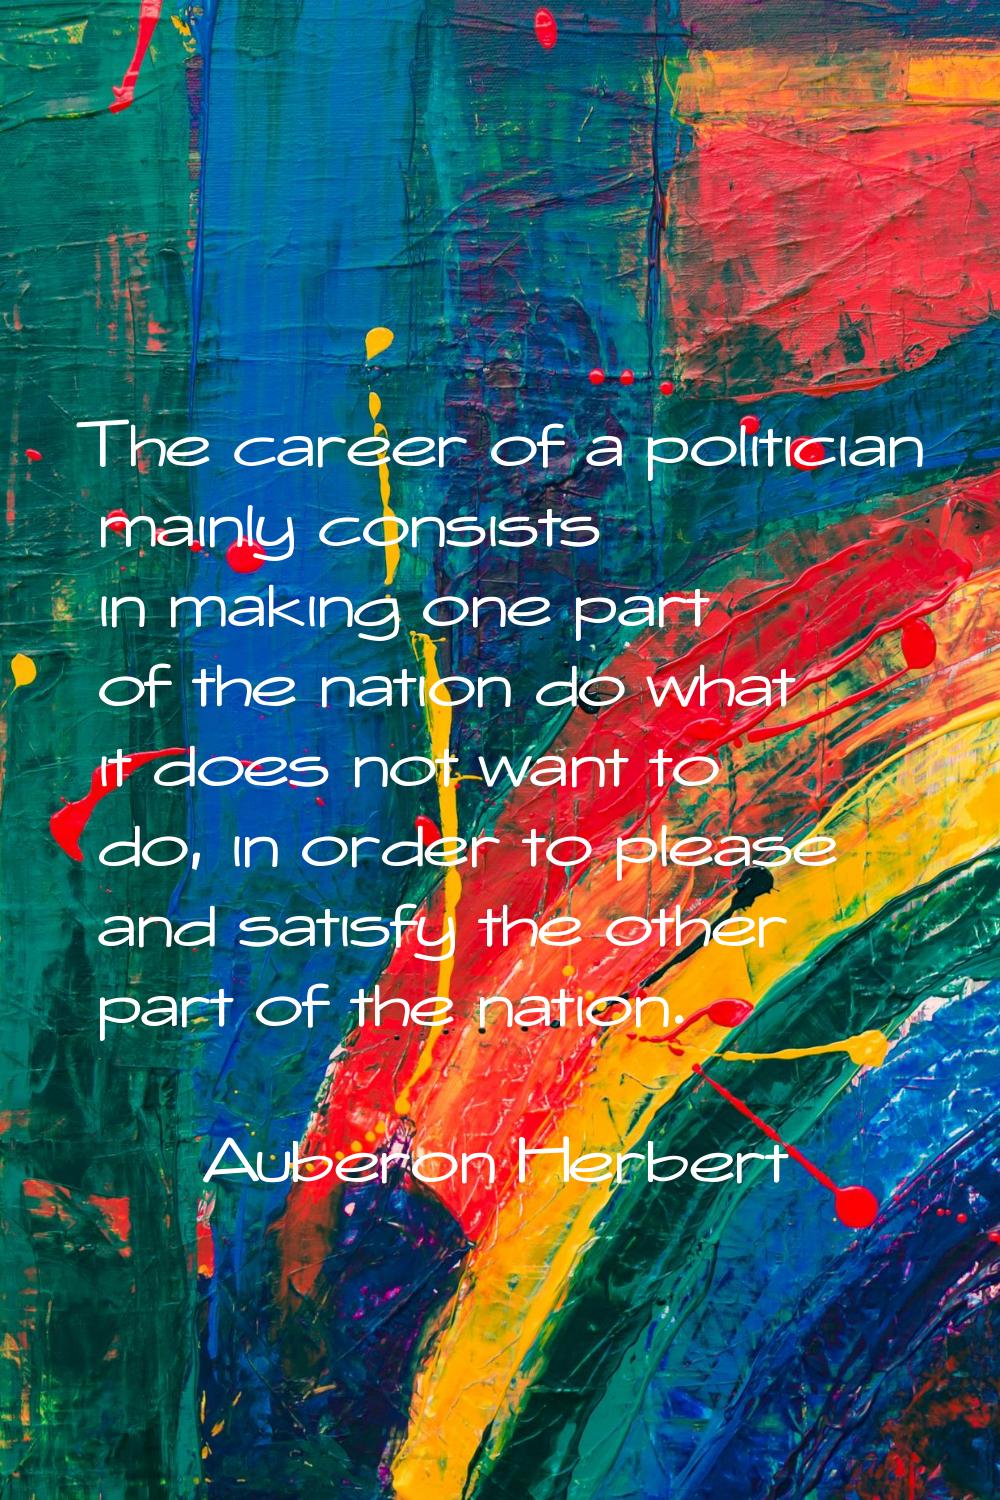 The career of a politician mainly consists in making one part of the nation do what it does not wan